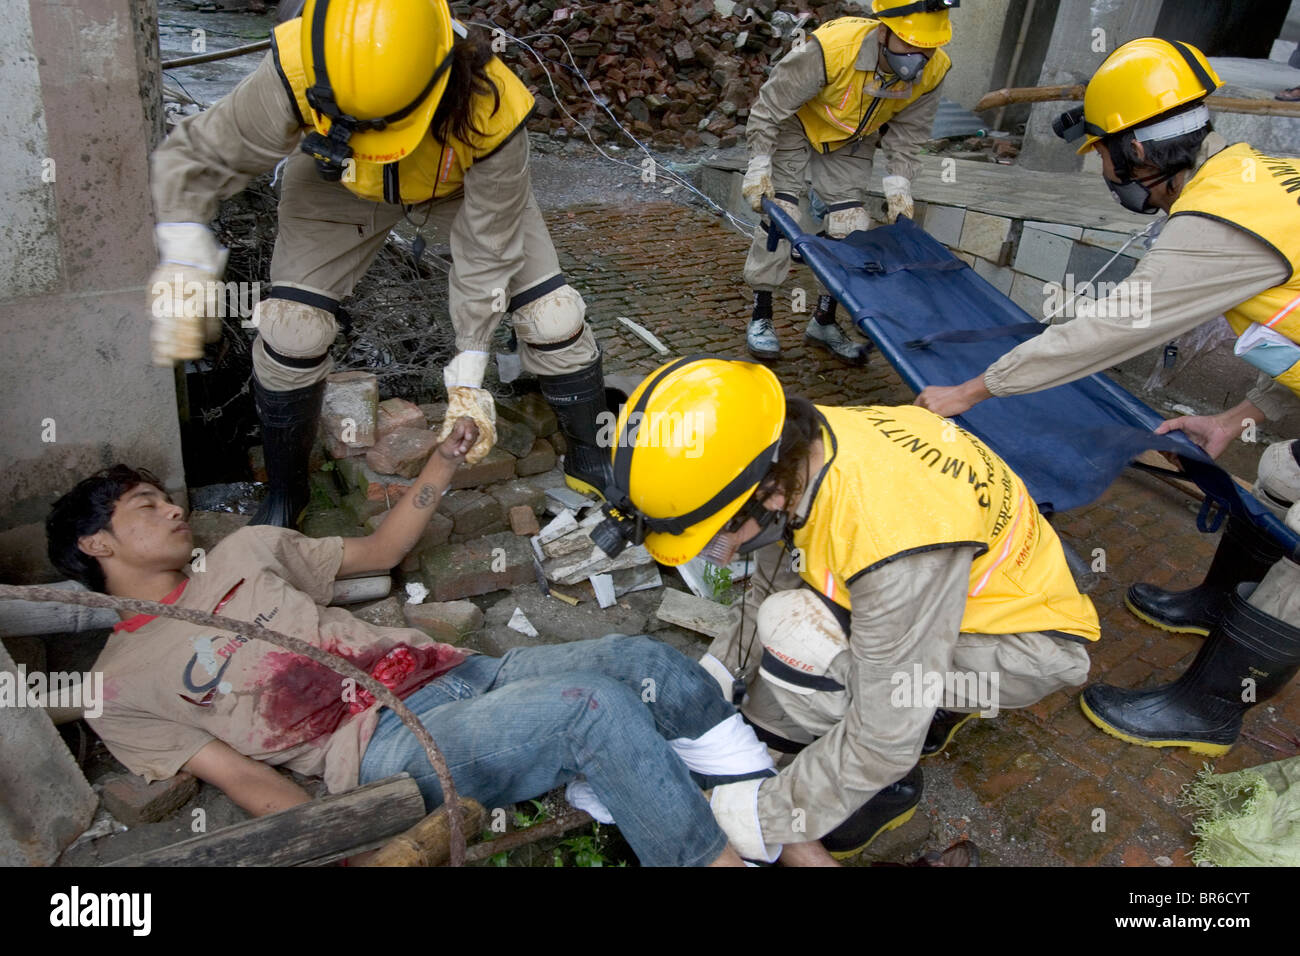 Community search and rescue team in Kathmandu Nepal. Stock Photo